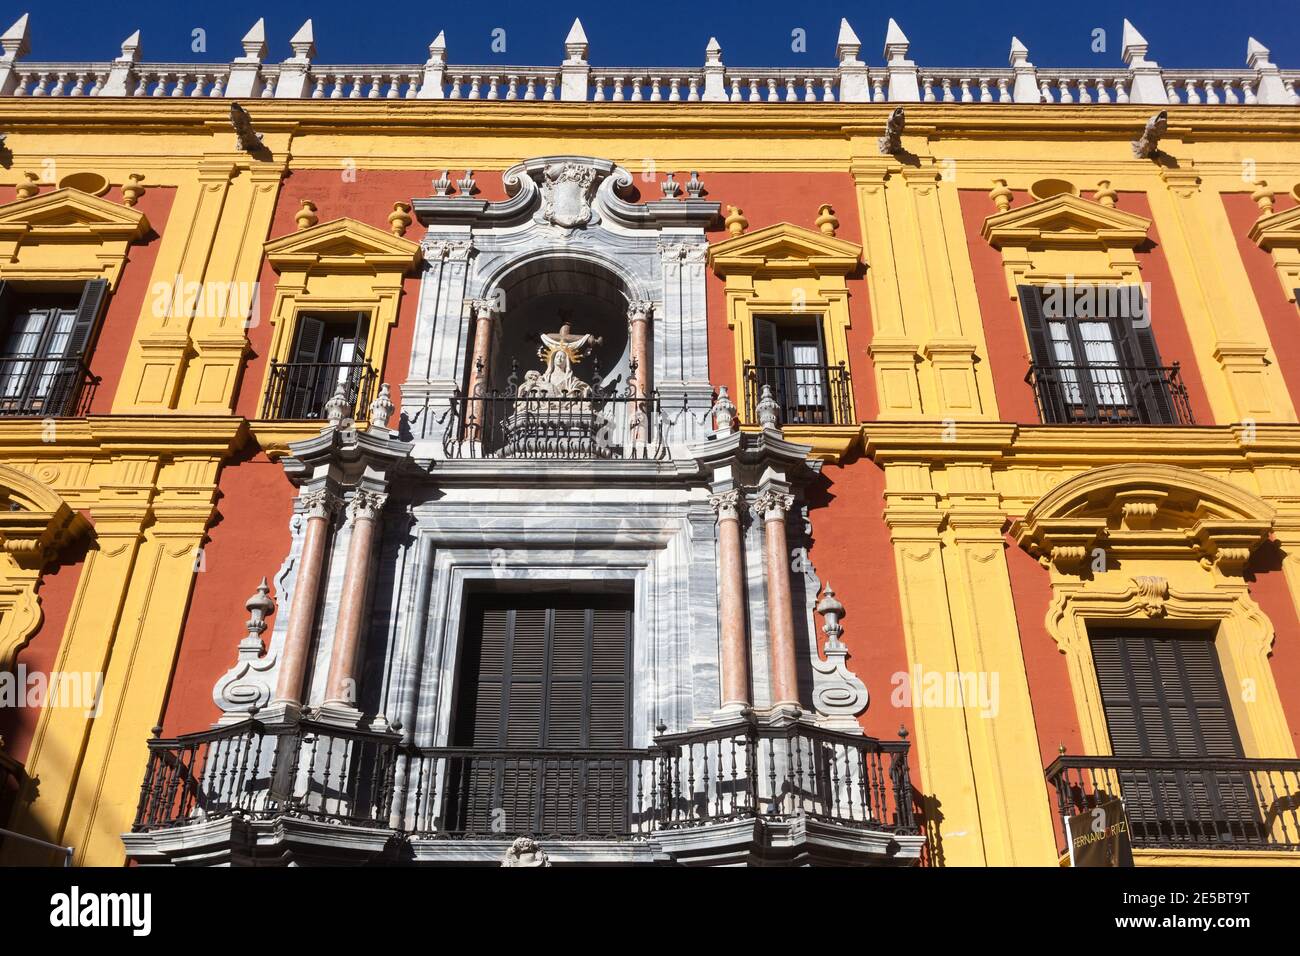 Episcopal Bishop Palace, Malaga Old Town city center Spain Stock Photo